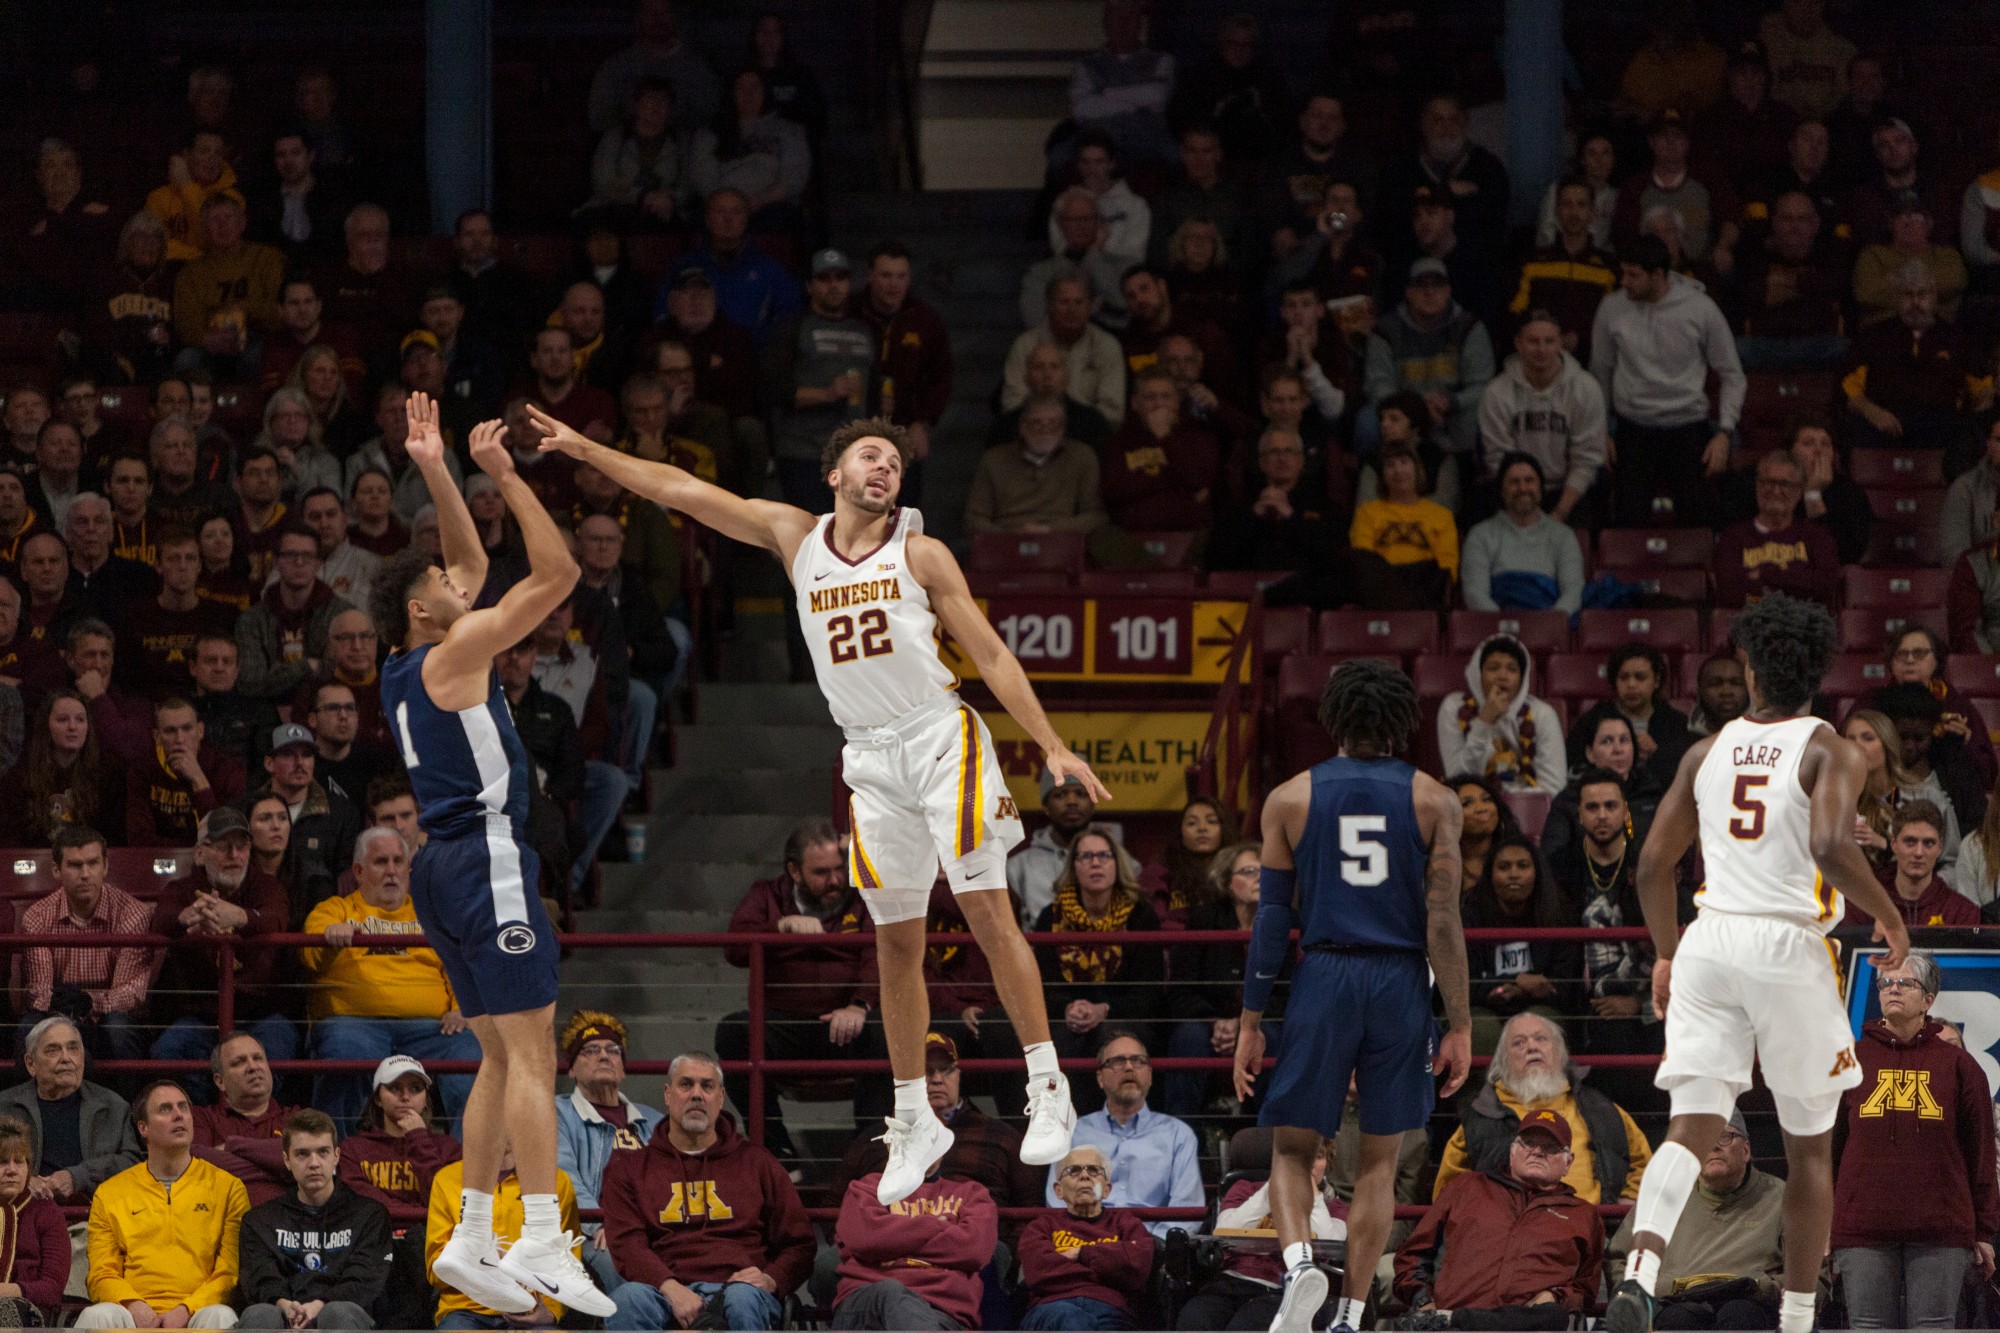 Gophers Guard Gabe Kalscheur leaps to block a shot at Williams Arena on Wednesday, Jan. 15.  Minnesota defeated the Penn State Nittany Lions 75-69. (Kamaan Richards / Minnesota Daily)